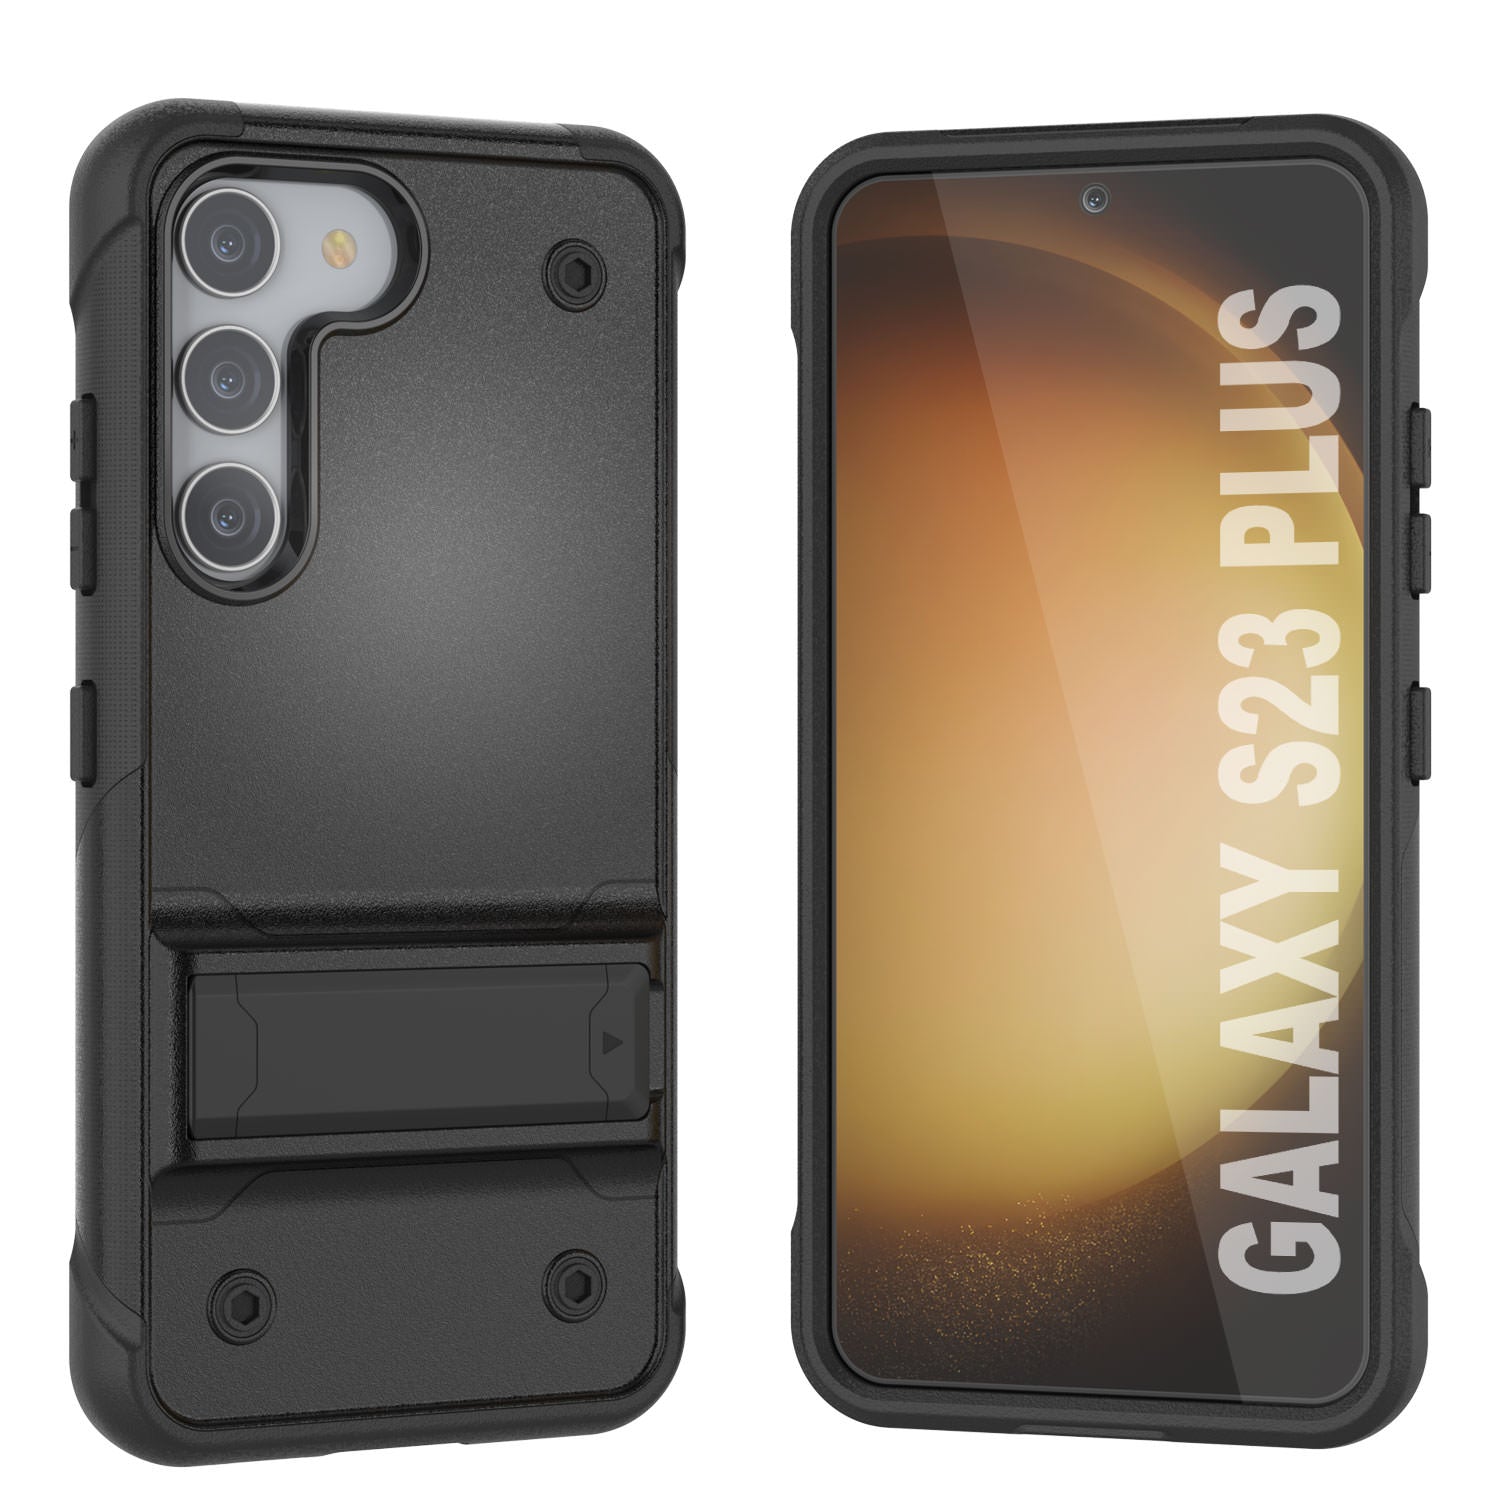 Punkcase Galaxy S23+ Plus Case [Reliance Series] Protective Hybrid Military Grade Cover W/Built-in Kickstand [Black]